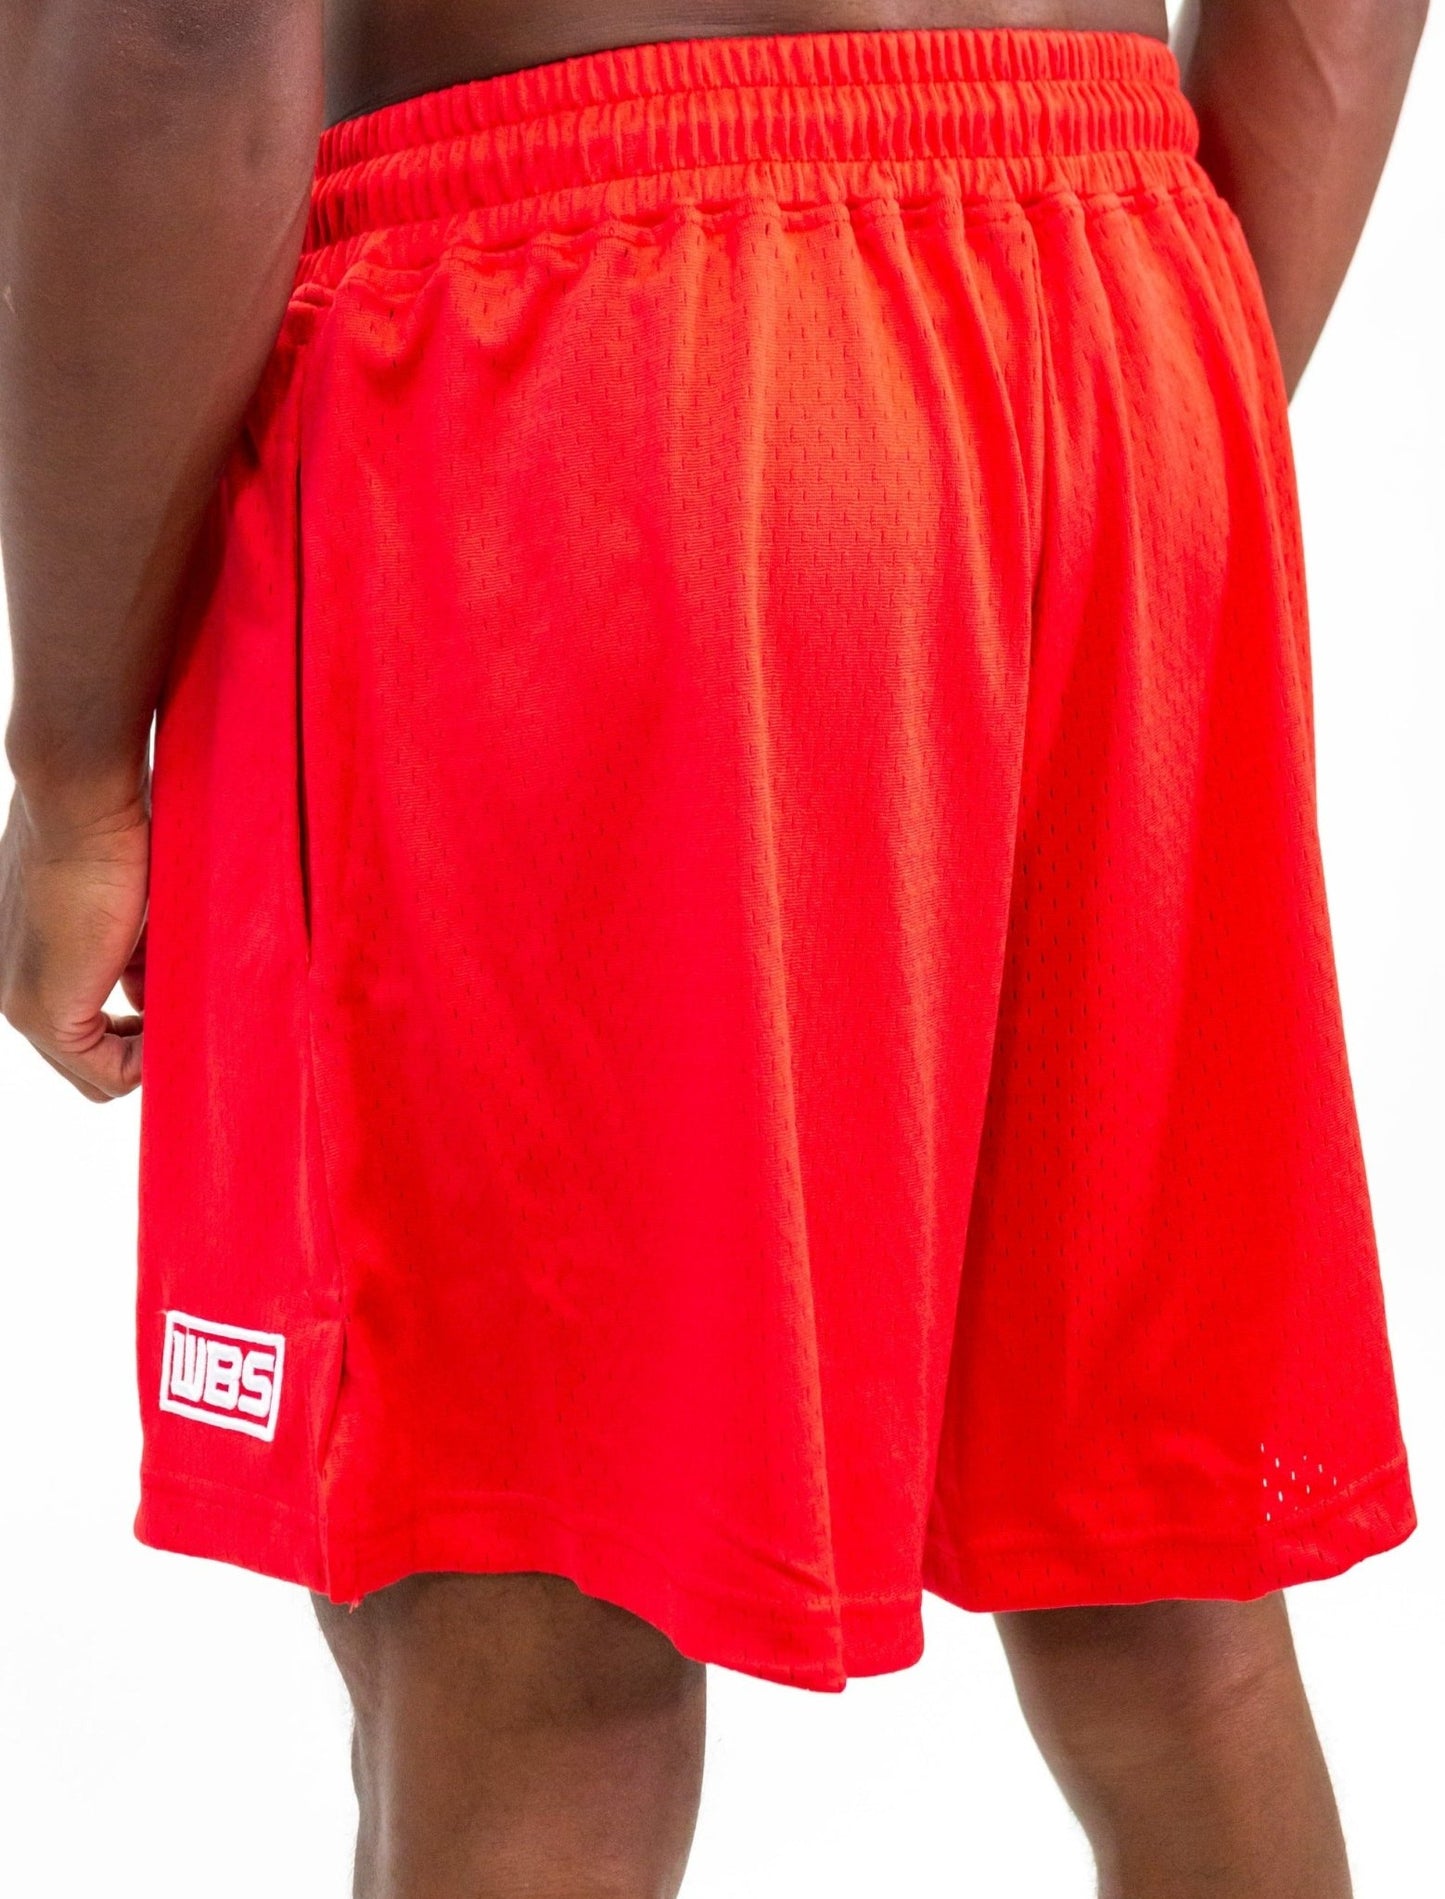 WBS 6" MESH SHORTS [RED] - We Ball Sports